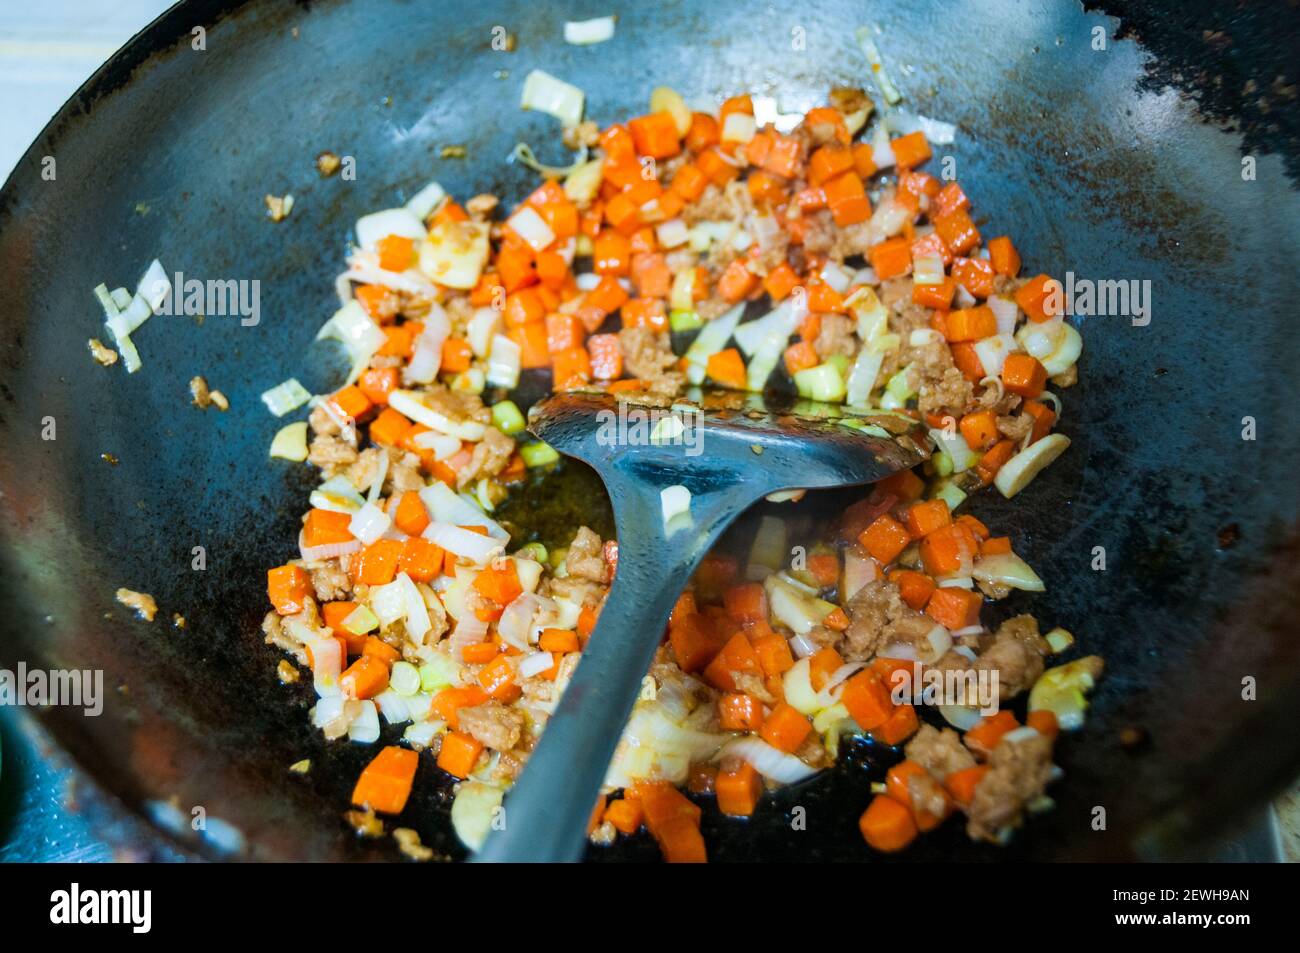 Cooking kimchi fried rice using Omipork a plant-based meat substitute in its ‘minced pork’ form. Stock Photo